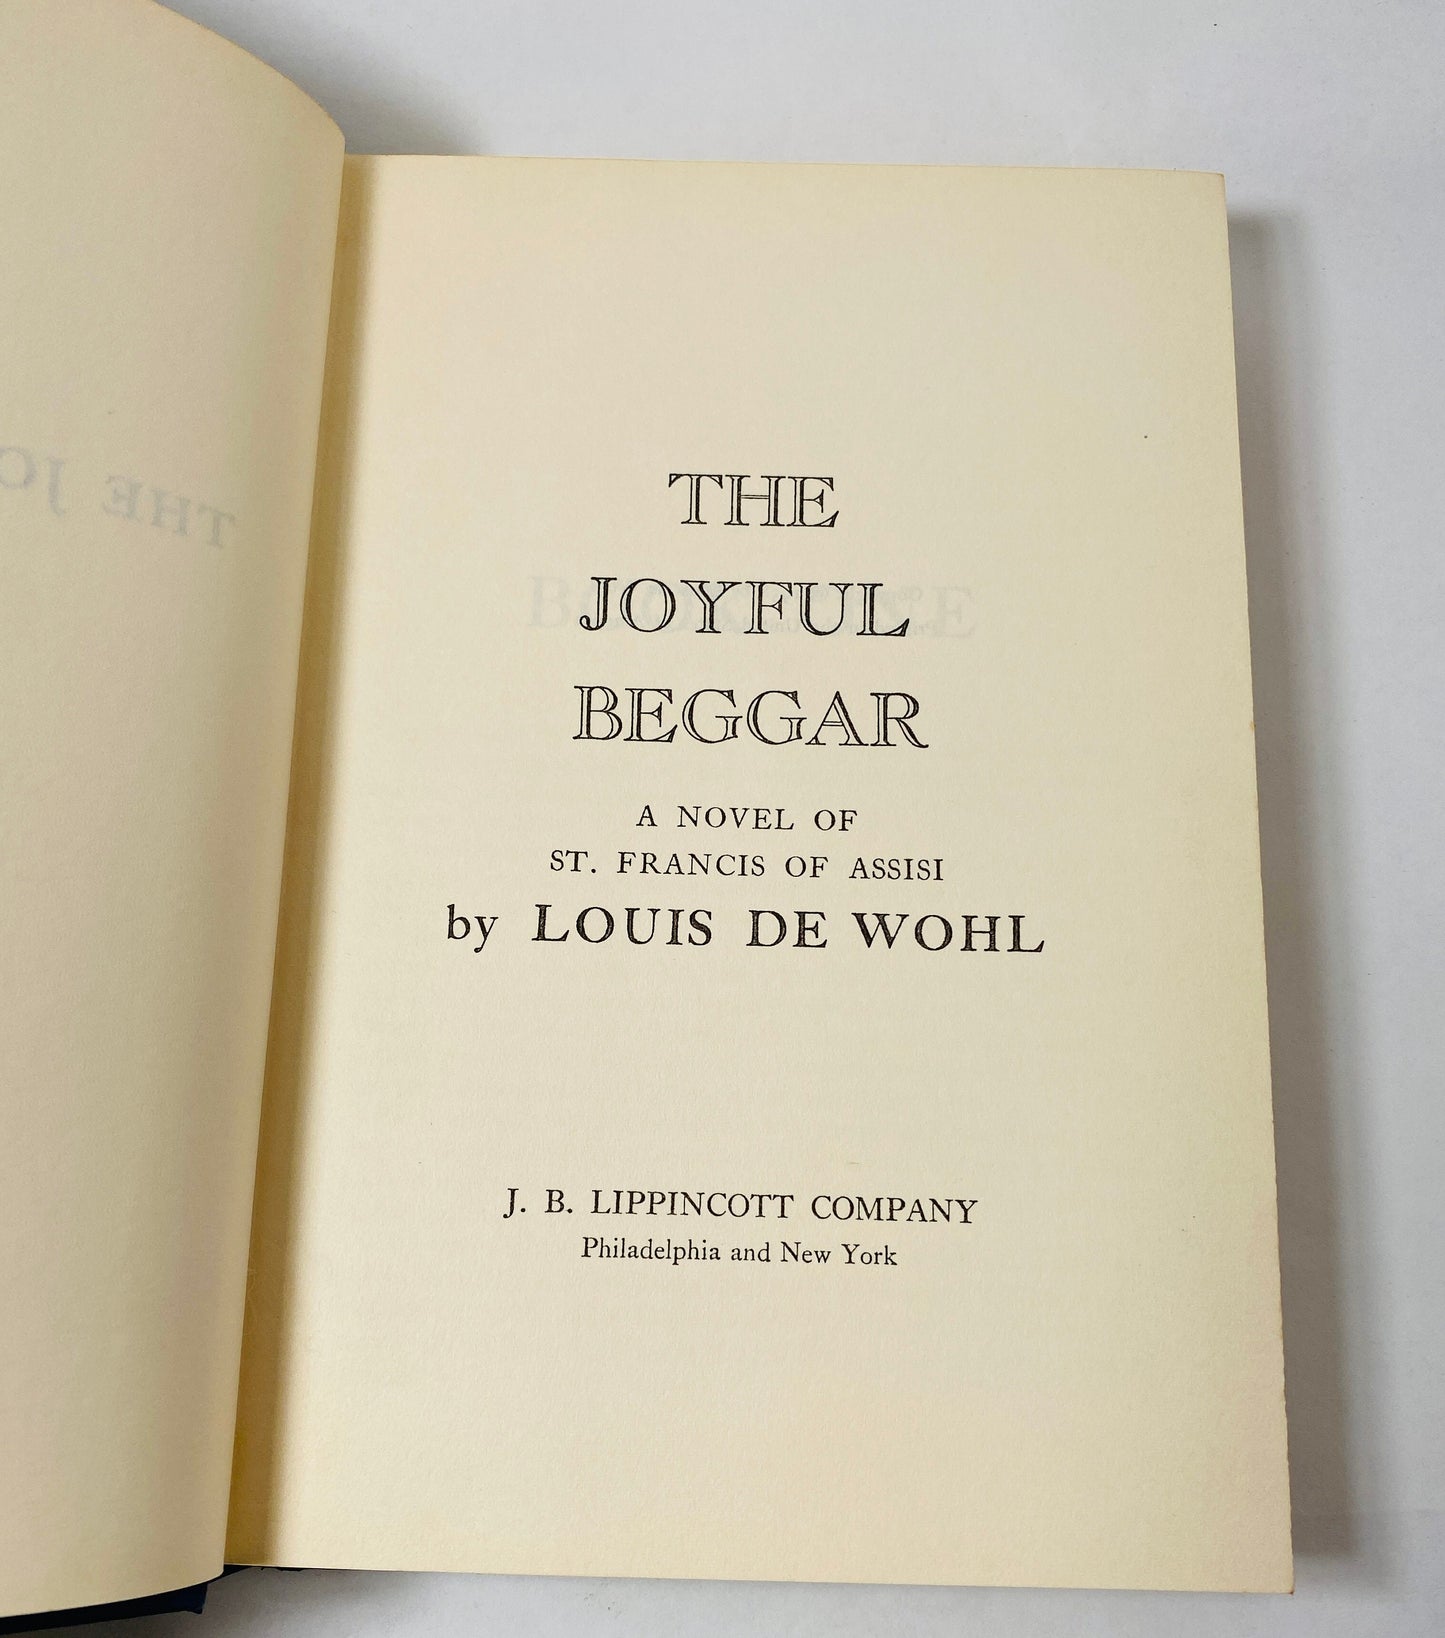 Joyful Beggar vintage book by Louis de Wohl circa 1958 with dust jacket Novel of Saint Francis of Assisi, the most beloved of all saints.